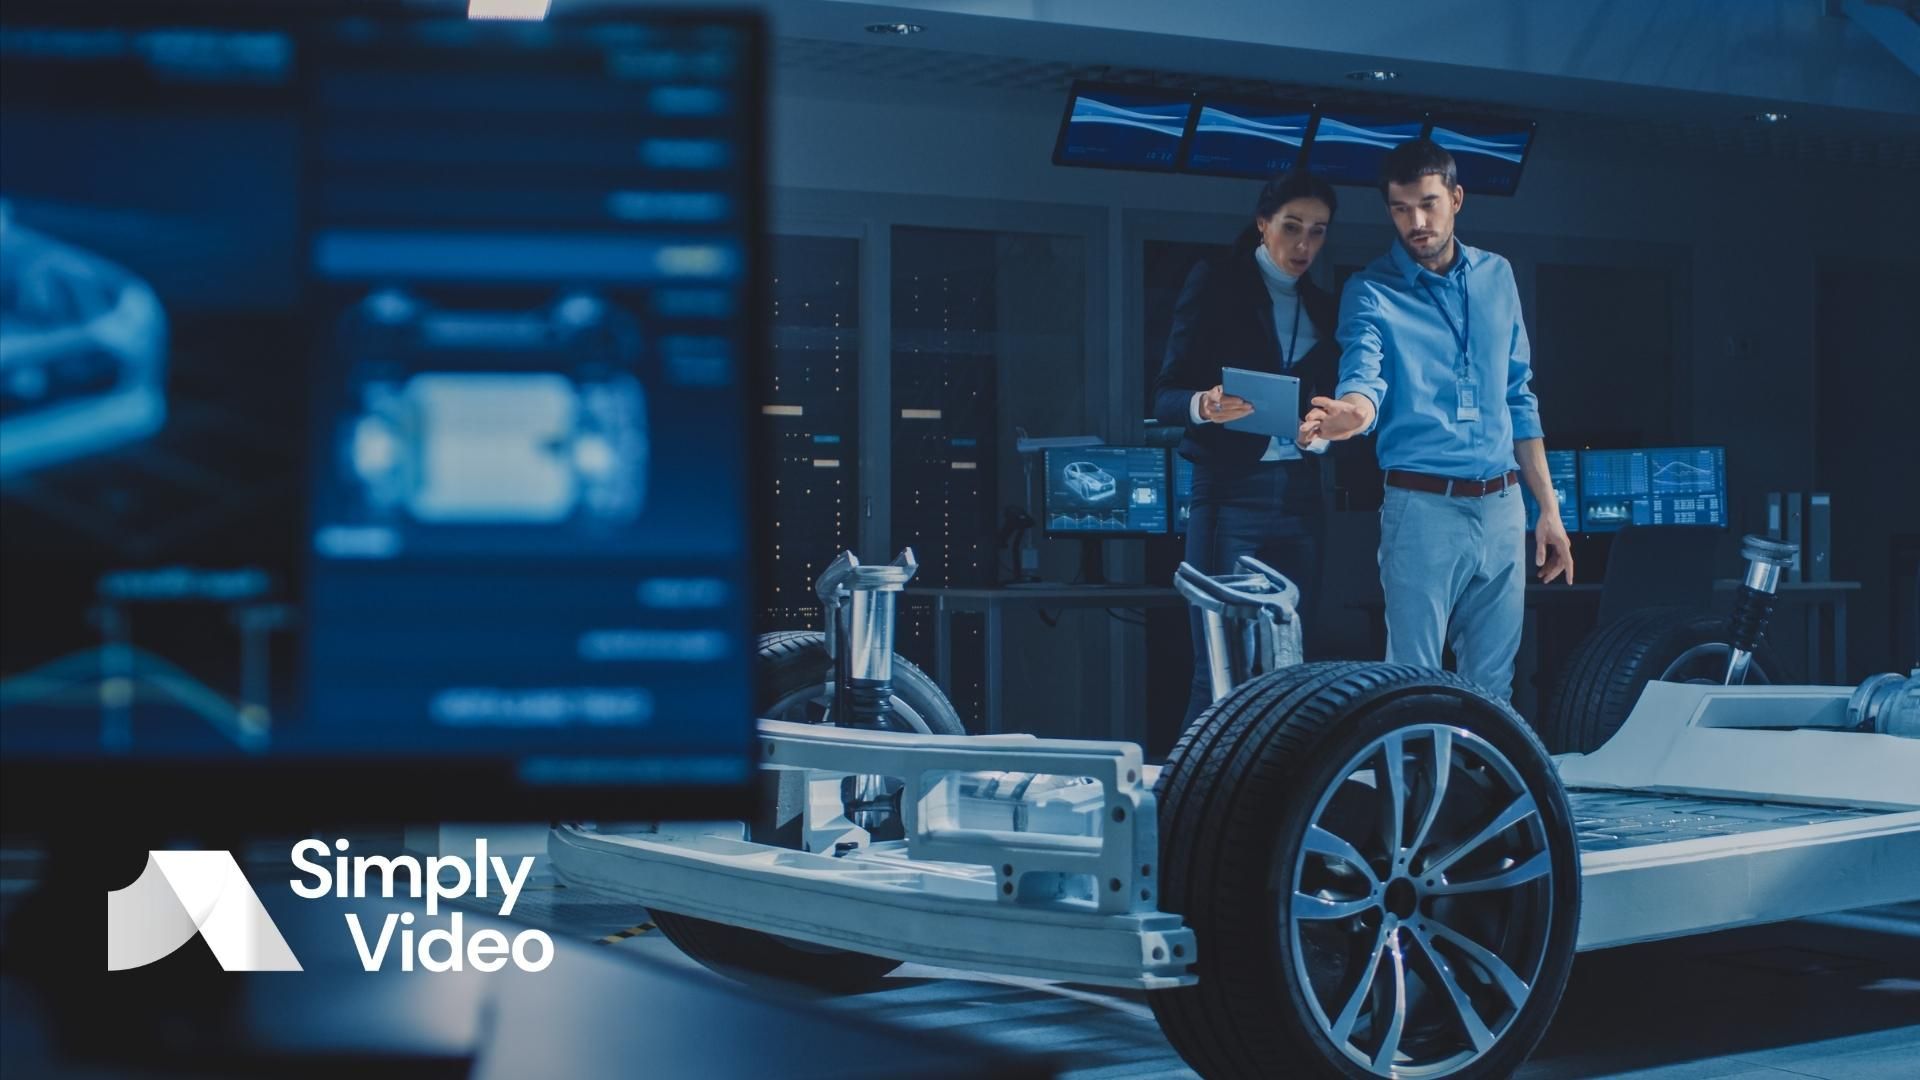 Electric vehicles, connected cars and XR on the factory floor – it's an exciting time for the automotive industry. Find out how XR is making a difference today.